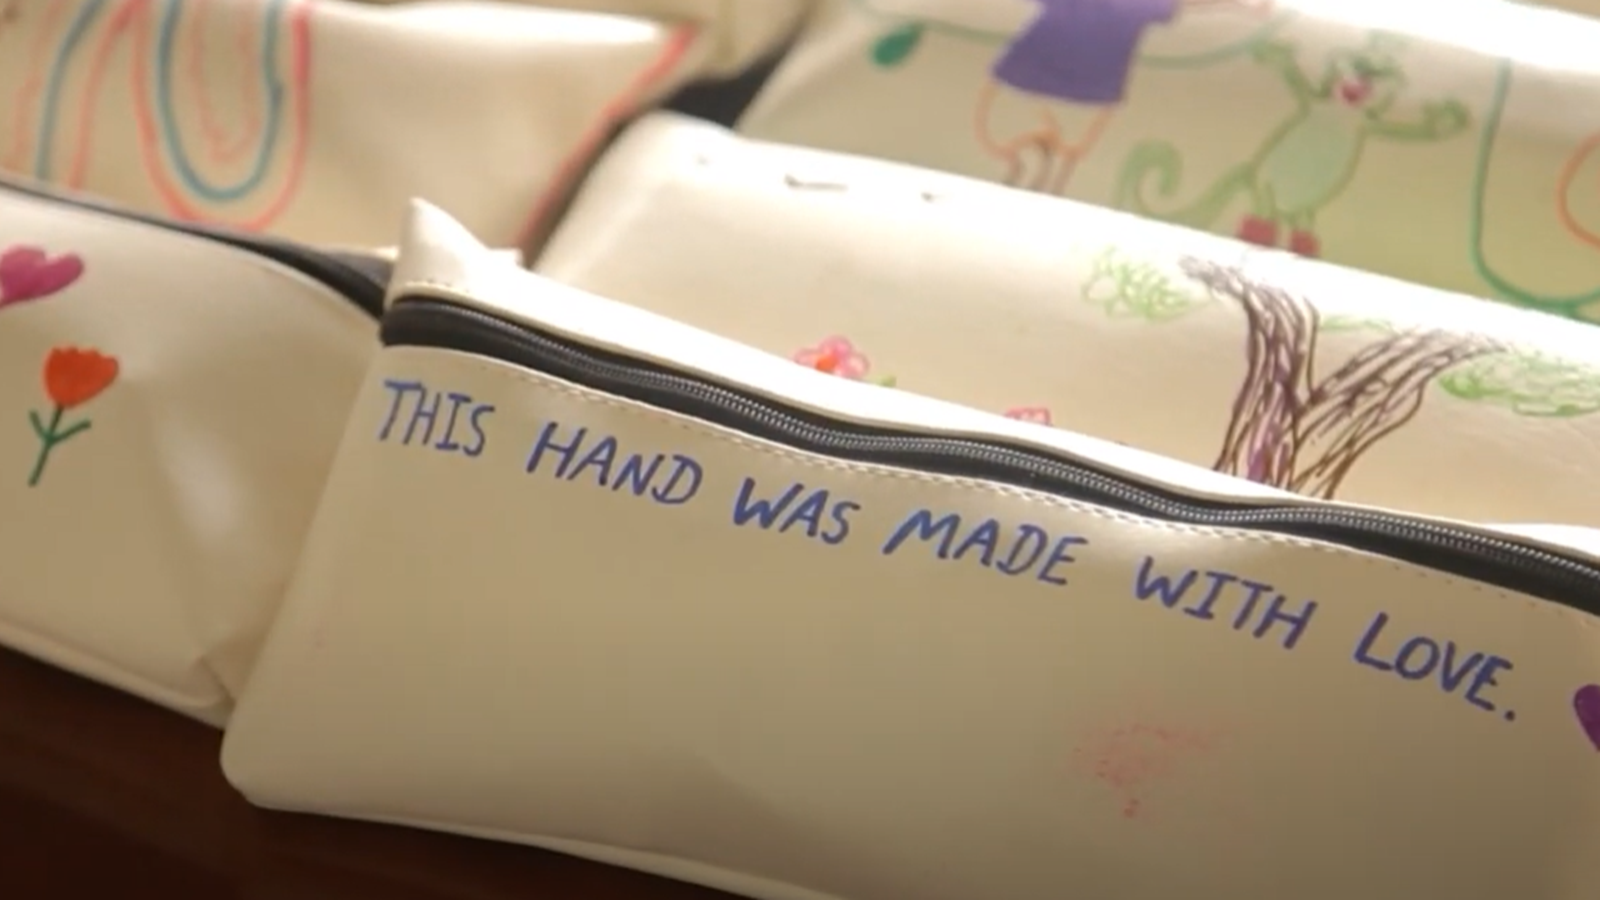 Zippered pouch that says "This hand was made with love."